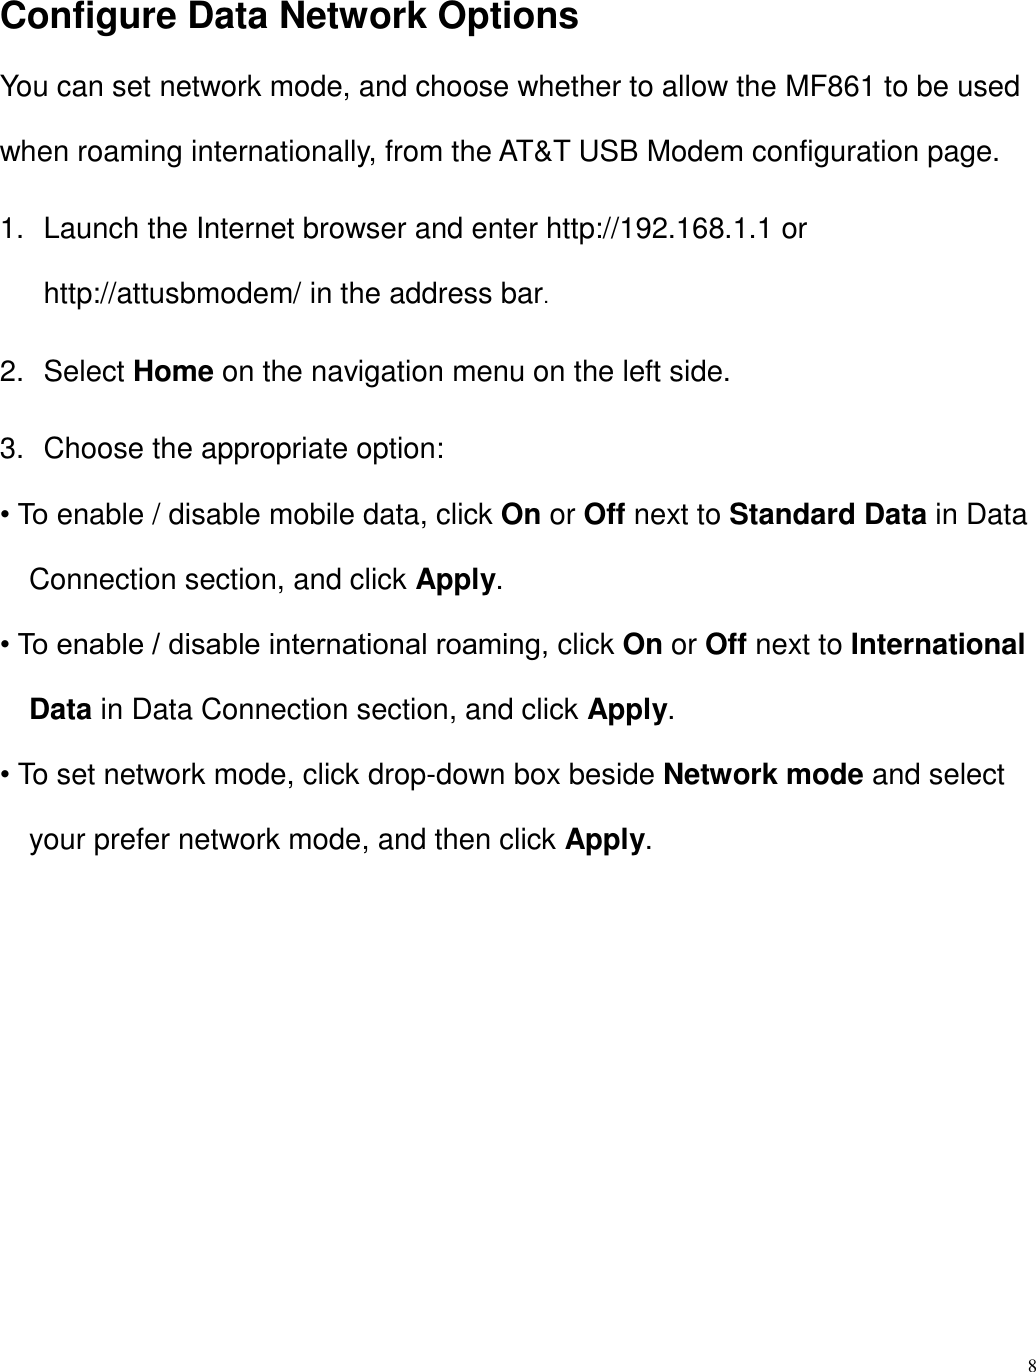 8  Configure Data Network Options You can set network mode, and choose whether to allow the MF861 to be used when roaming internationally, from the AT&amp;T USB Modem configuration page. 1.  Launch the Internet browser and enter http://192.168.1.1 or   http://attusbmodem/ in the address bar. 2.  Select Home on the navigation menu on the left side. 3.  Choose the appropriate option: • To enable / disable mobile data, click On or Off next to Standard Data in Data Connection section, and click Apply. • To enable / disable international roaming, click On or Off next to International Data in Data Connection section, and click Apply. • To set network mode, click drop-down box beside Network mode and select your prefer network mode, and then click Apply.       